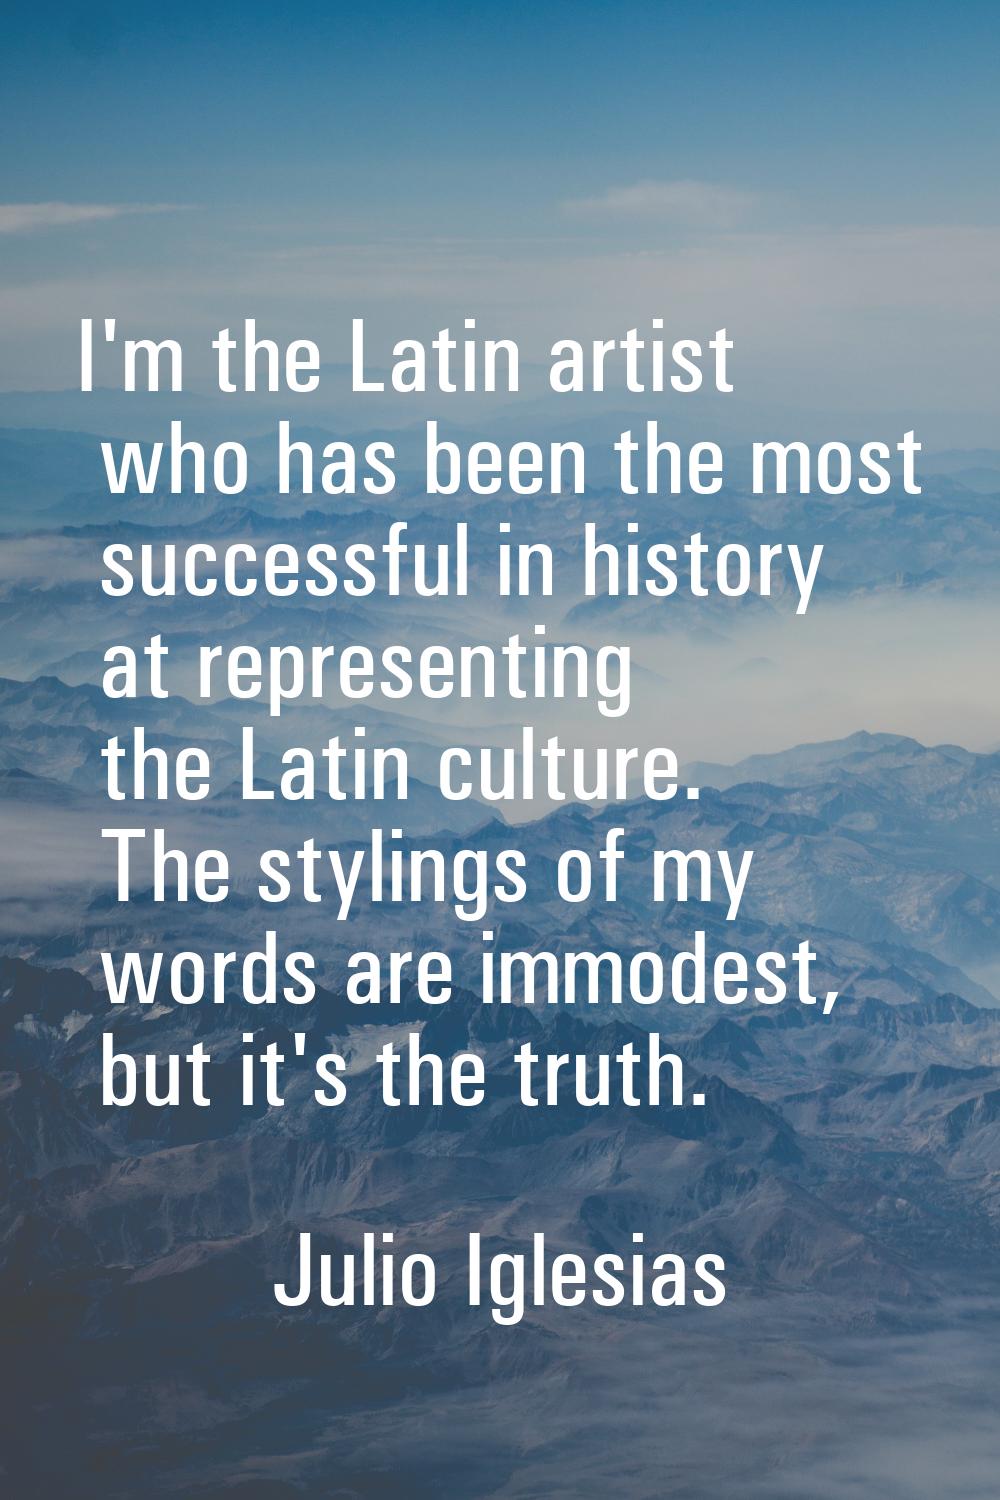 I'm the Latin artist who has been the most successful in history at representing the Latin culture.